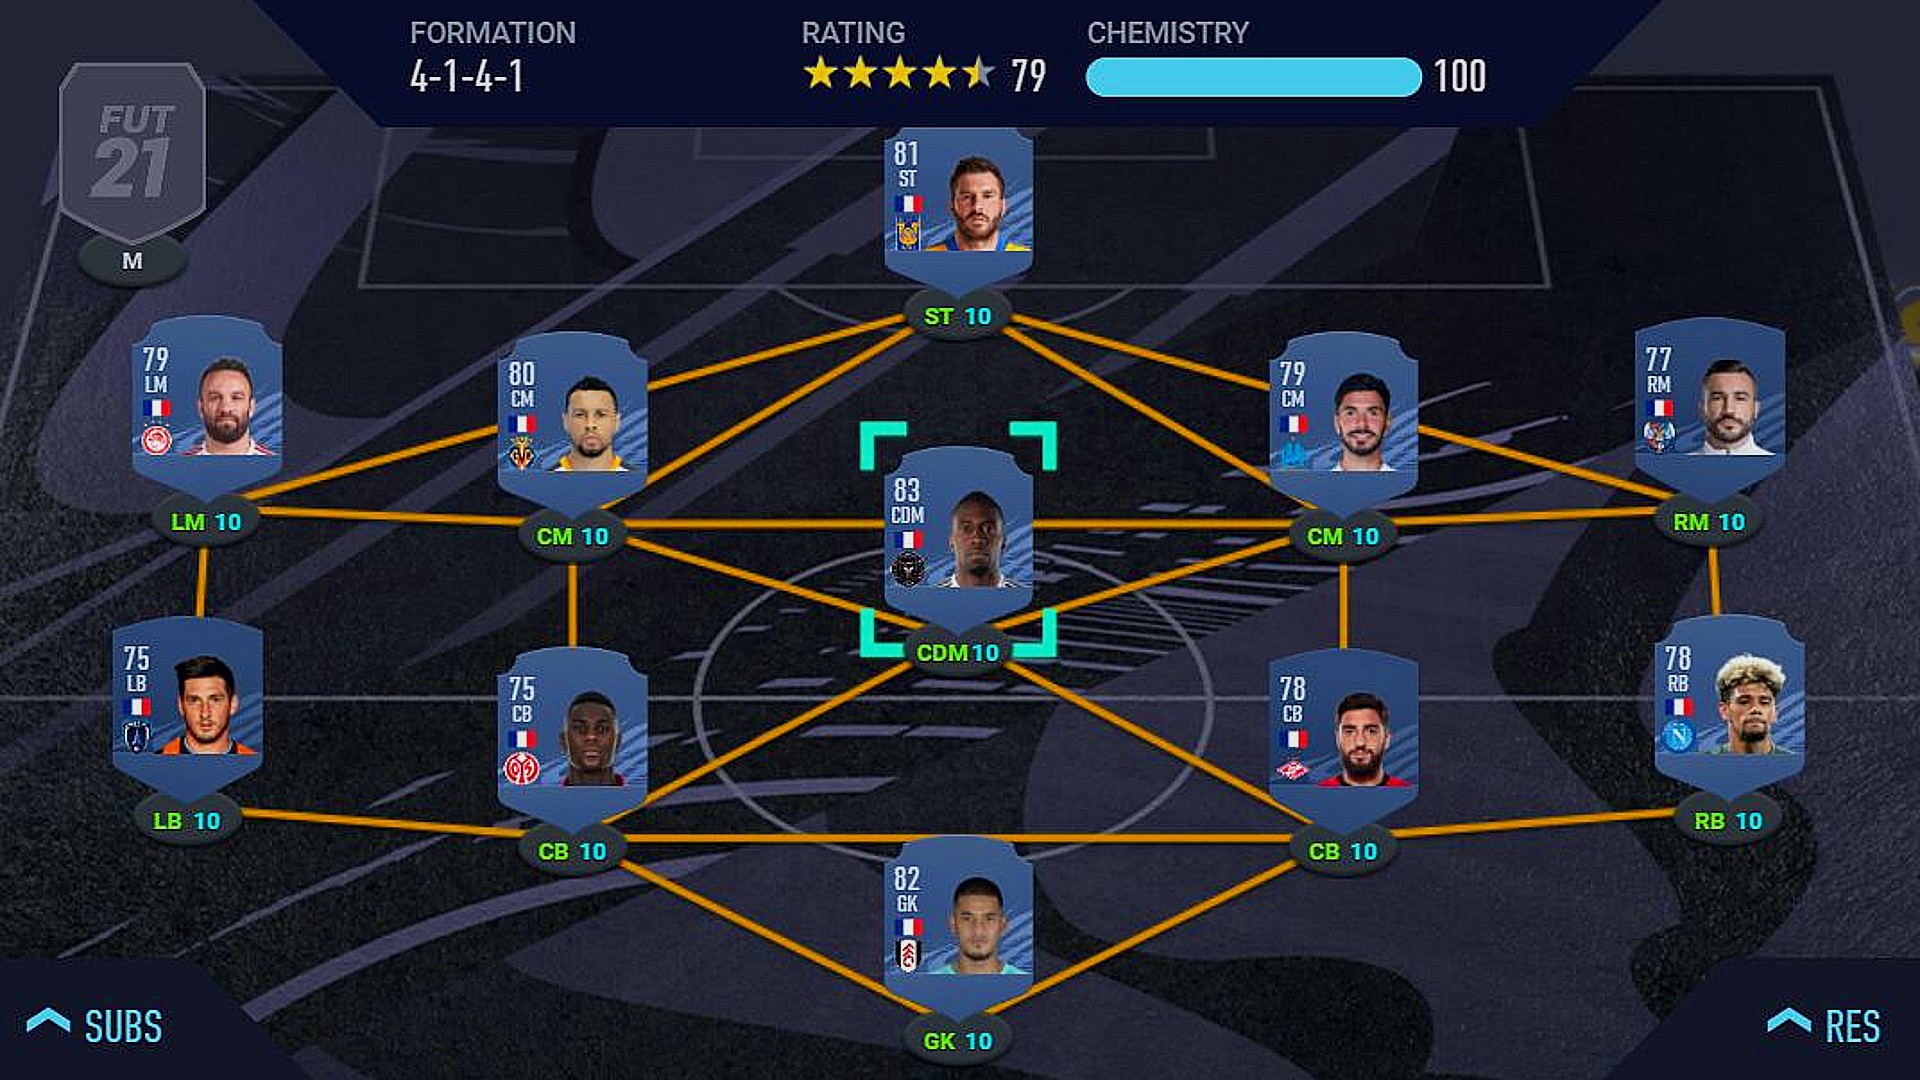 FIFA 21 Hybrid Leagues SBC set: A team setup in the formation screen made up of French players.